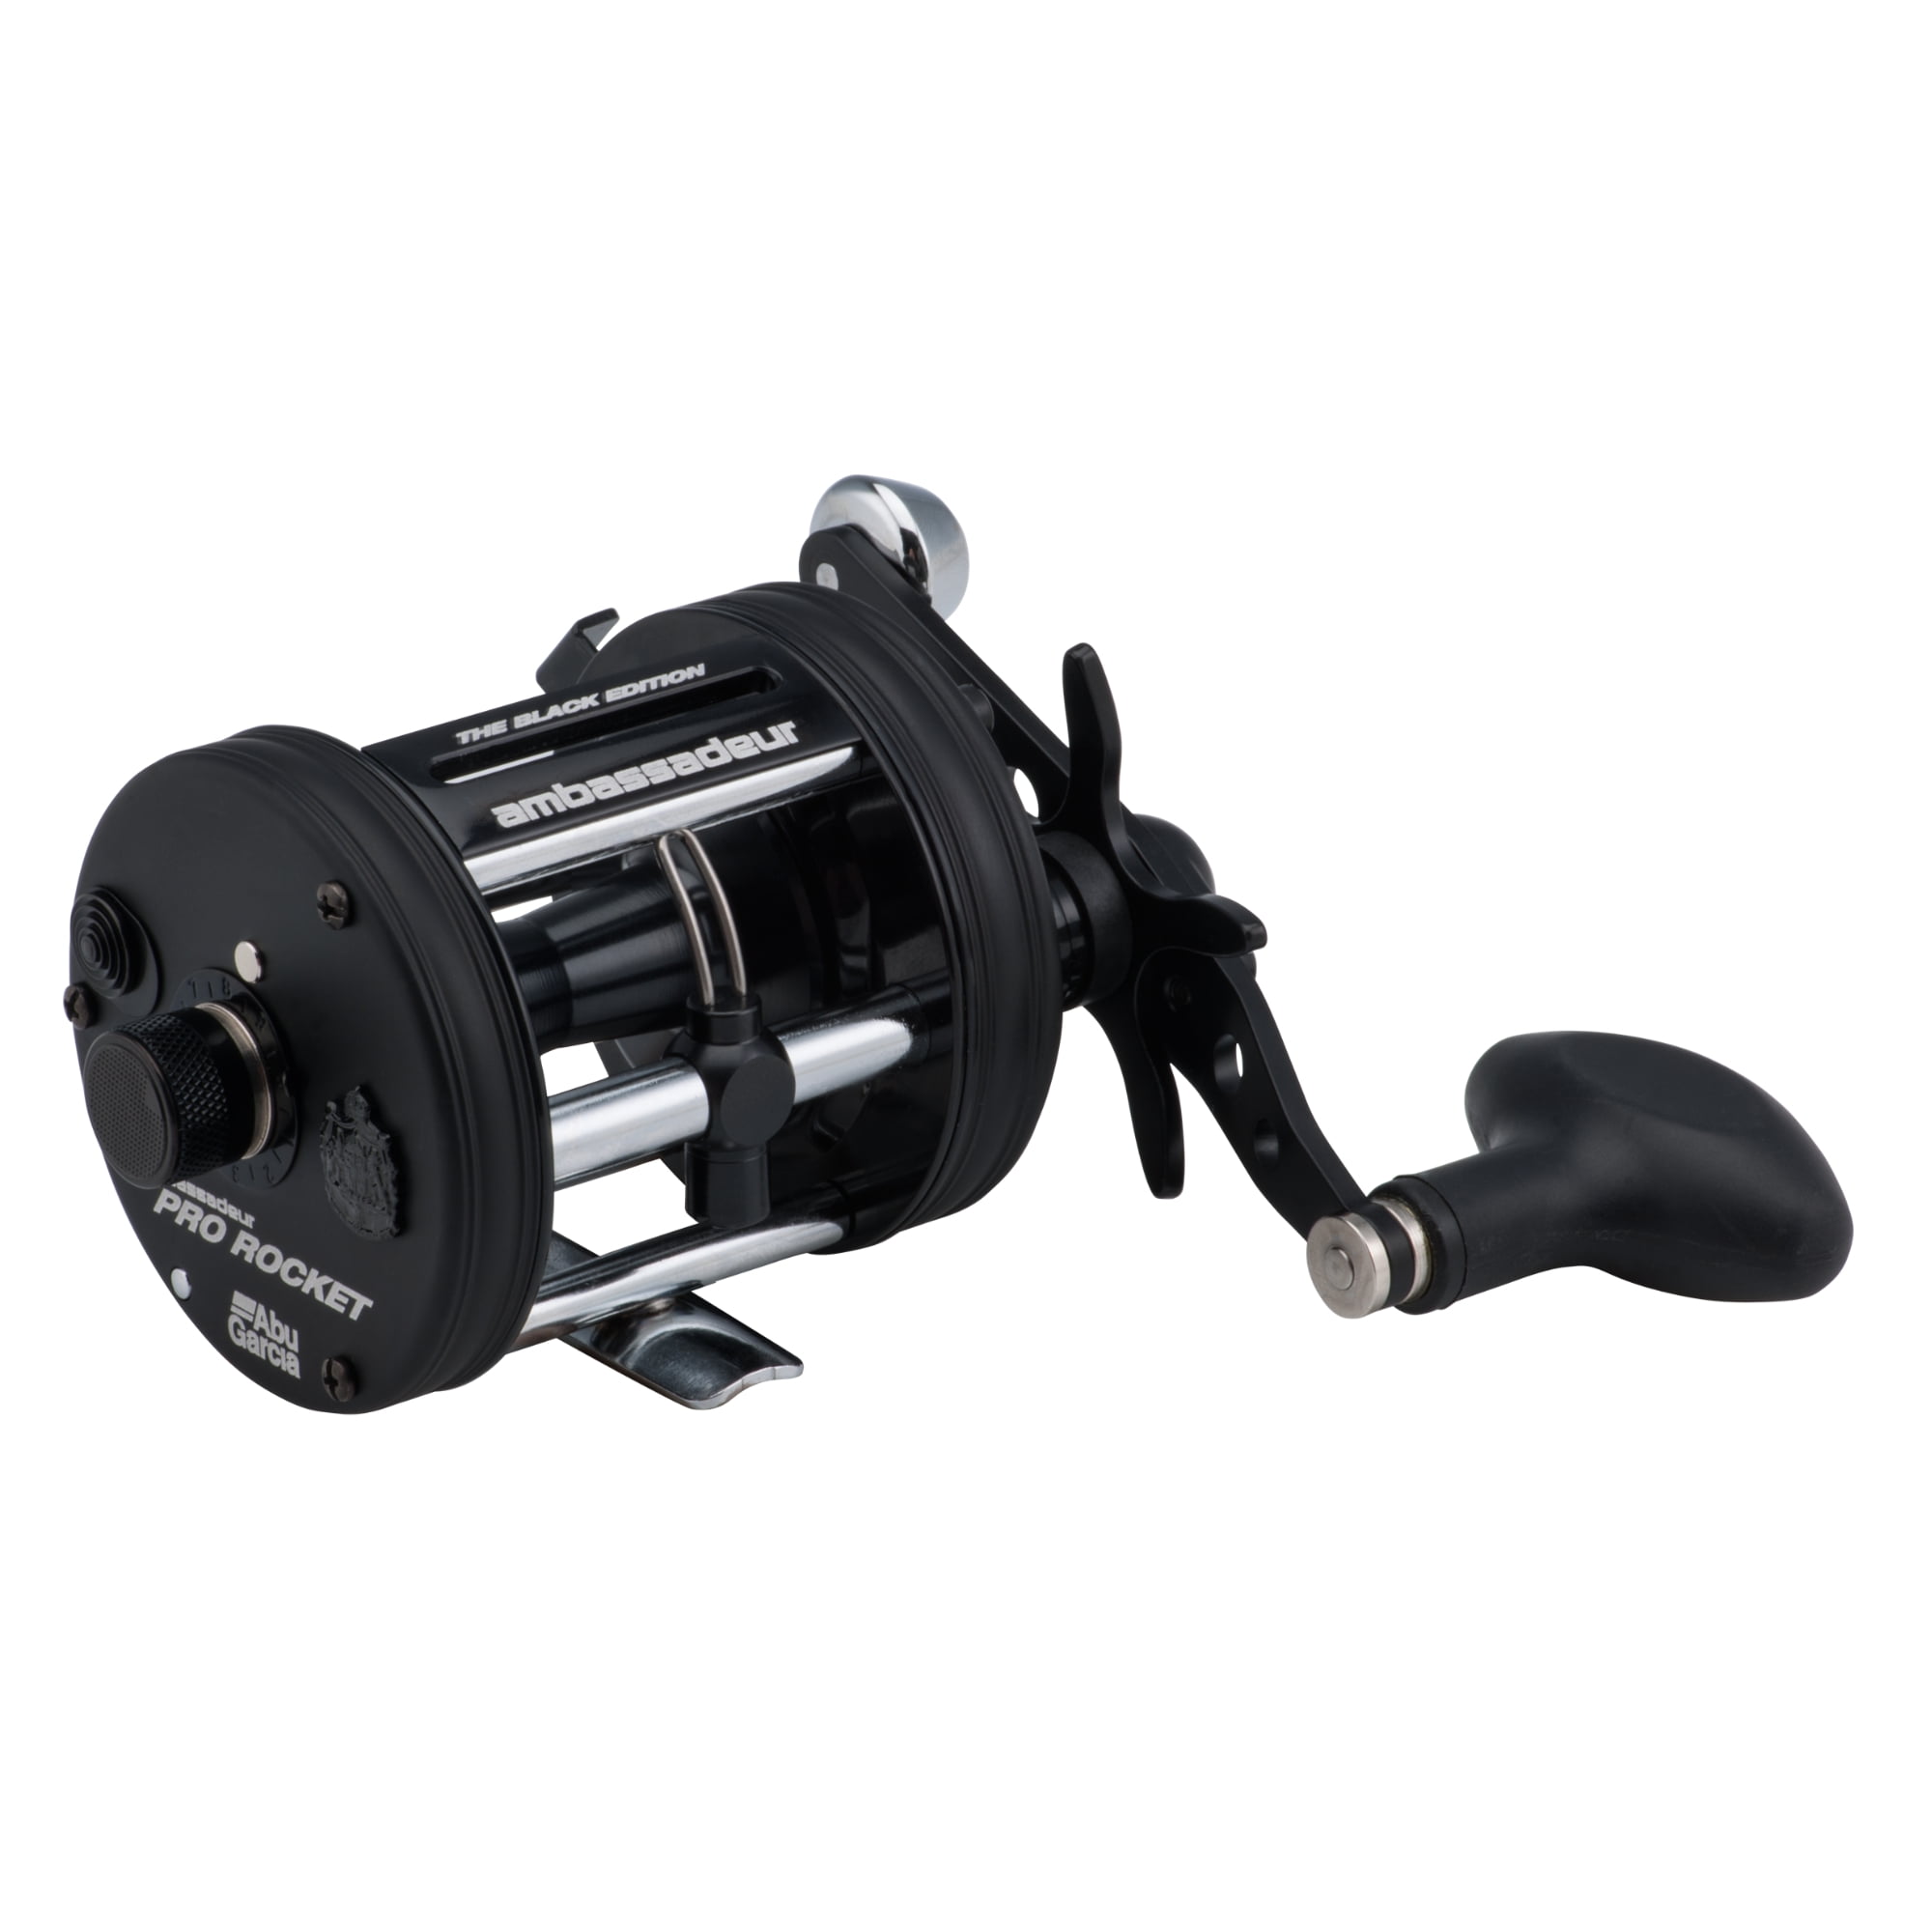 I found a gem hidden in a corner of the tackle shop I work at. The Abu  Garcia Ambassadeur Pro Max 1600 chrome. This reel is one of the most  refined, if